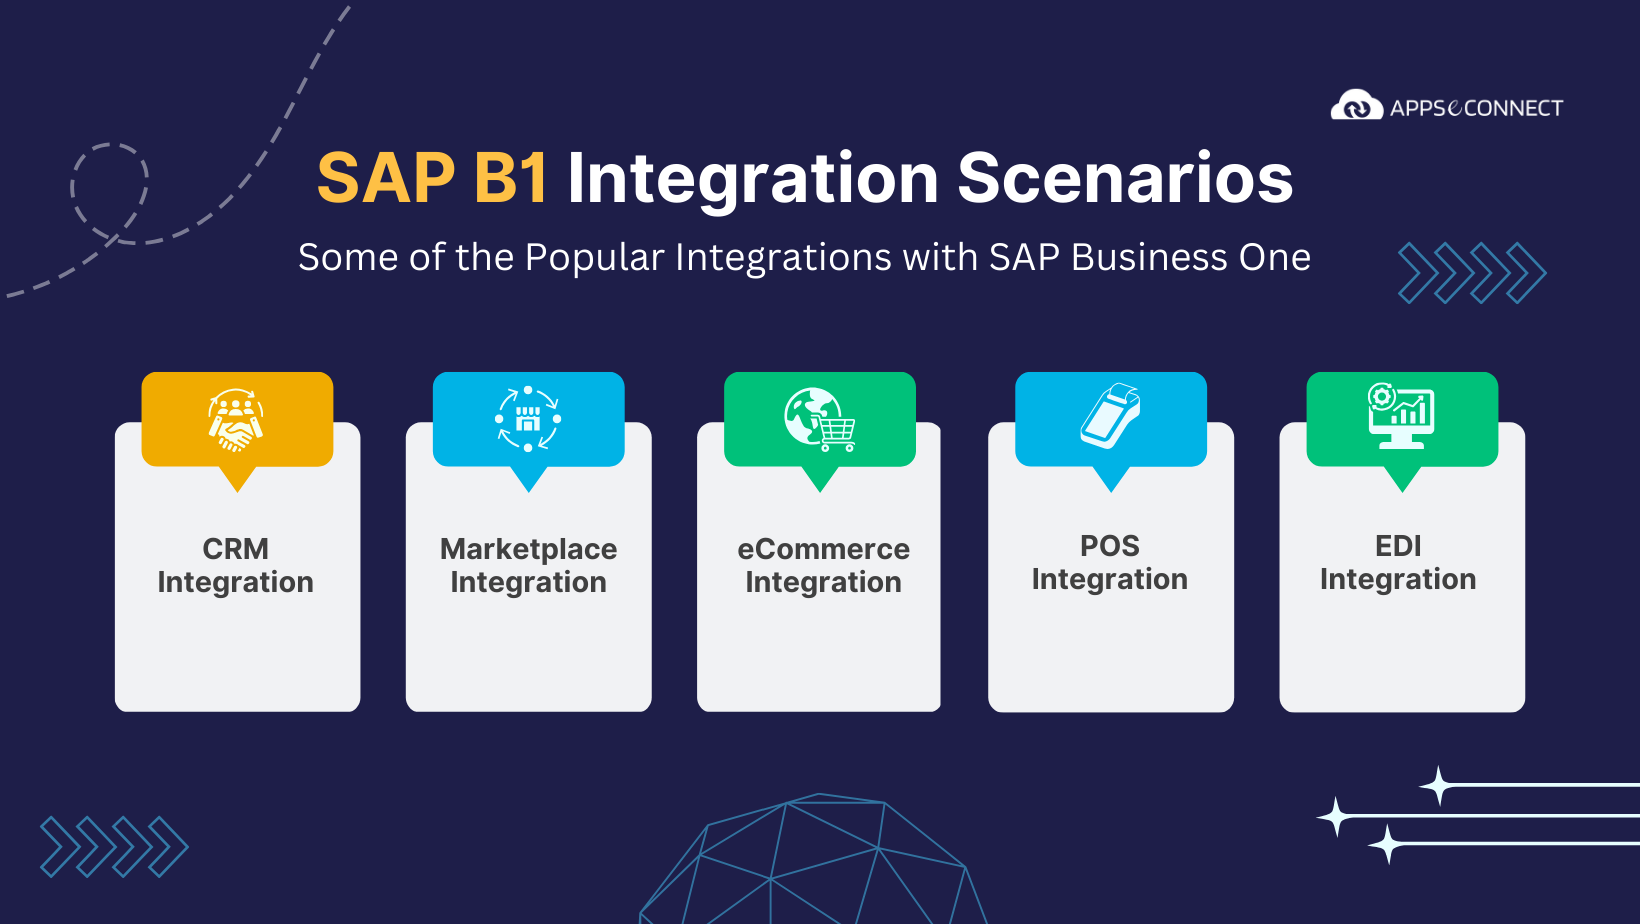 sap-business-one-integration-scenarios-with-different-applications